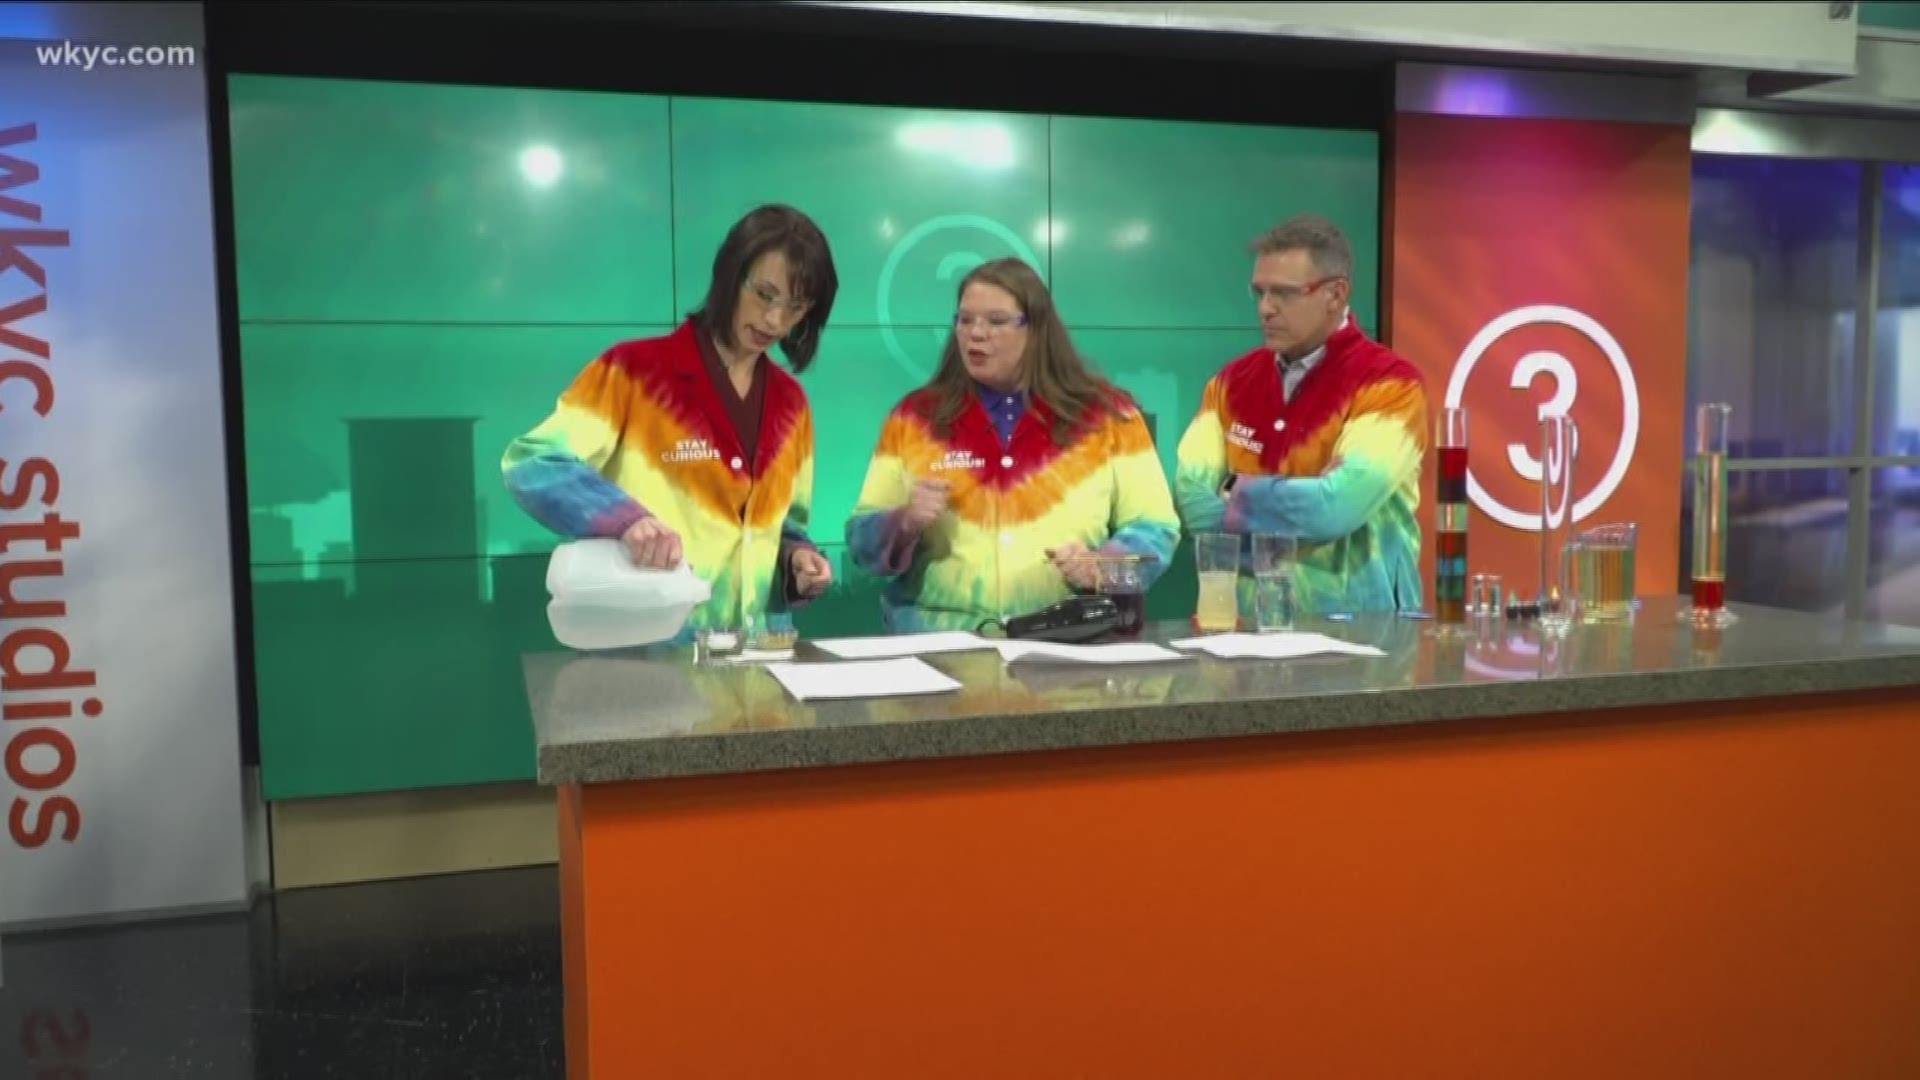 We have a few cool days coming that may cause a little cabin fever. Robyn Kaltenbach from the Great Lakes Science Center has some fun ideas for you and the kids!